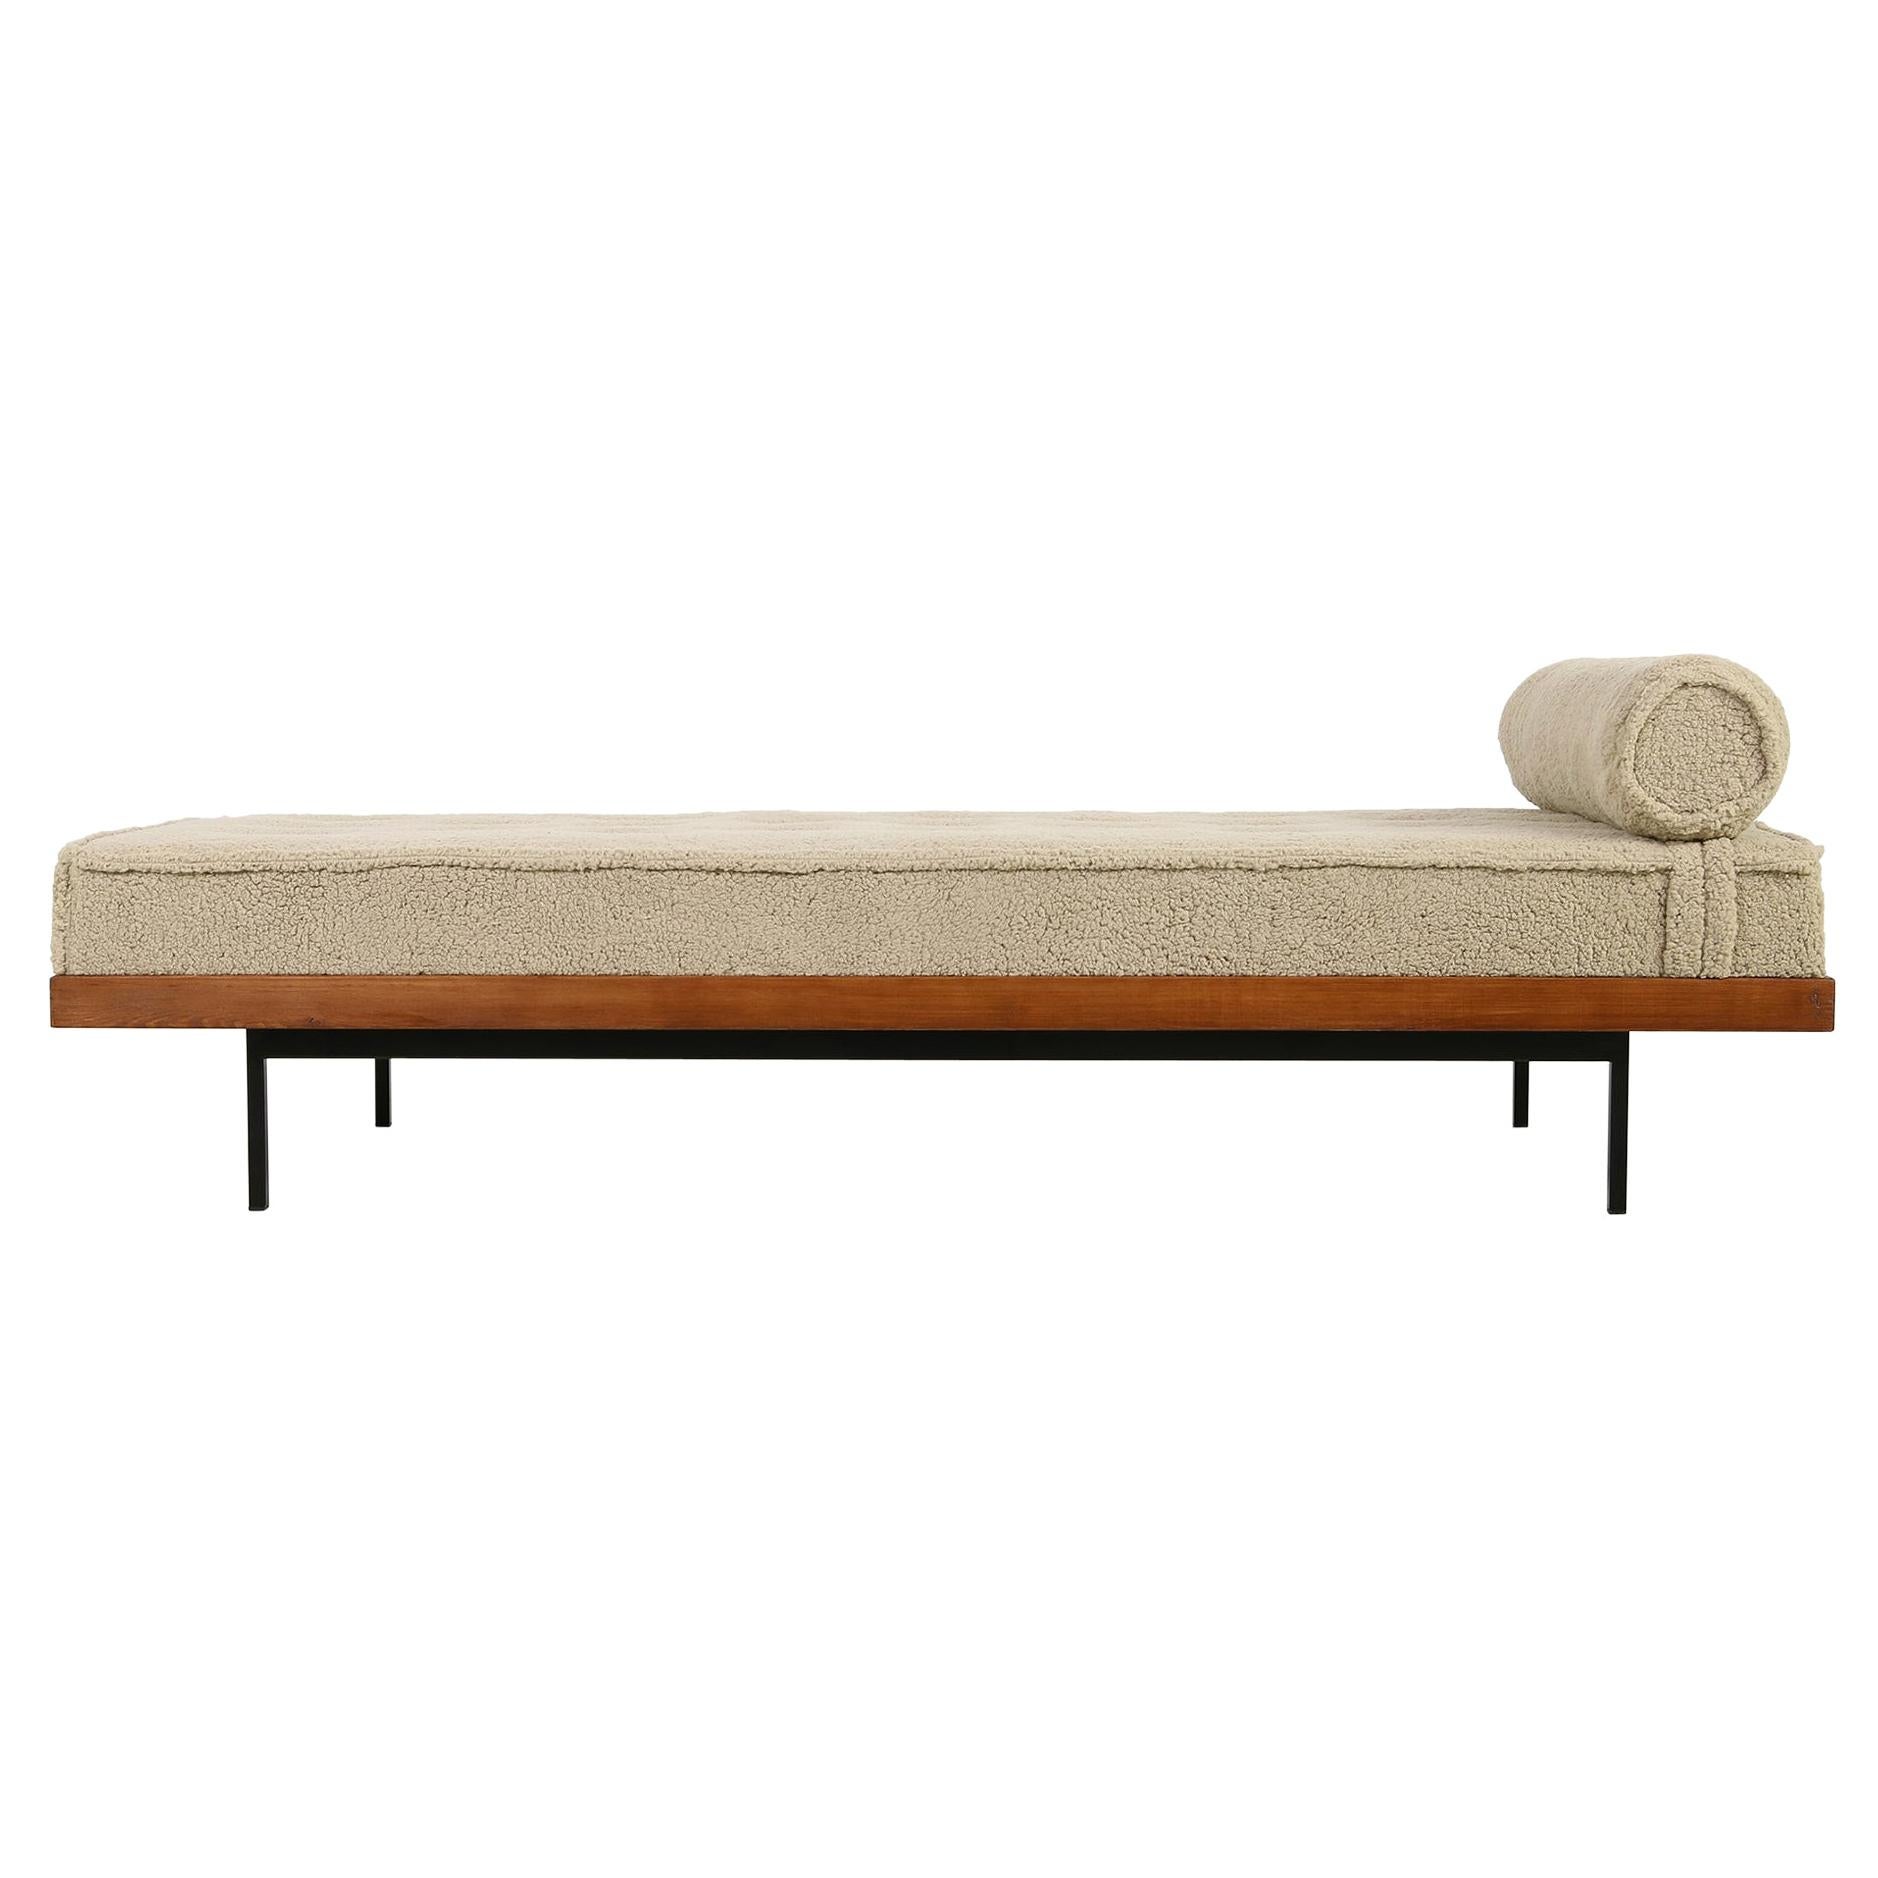 Nathan Lindberg Daybed Mod. 31 Larch Wood, Teak, Tufted, Teddy Fur and Leather